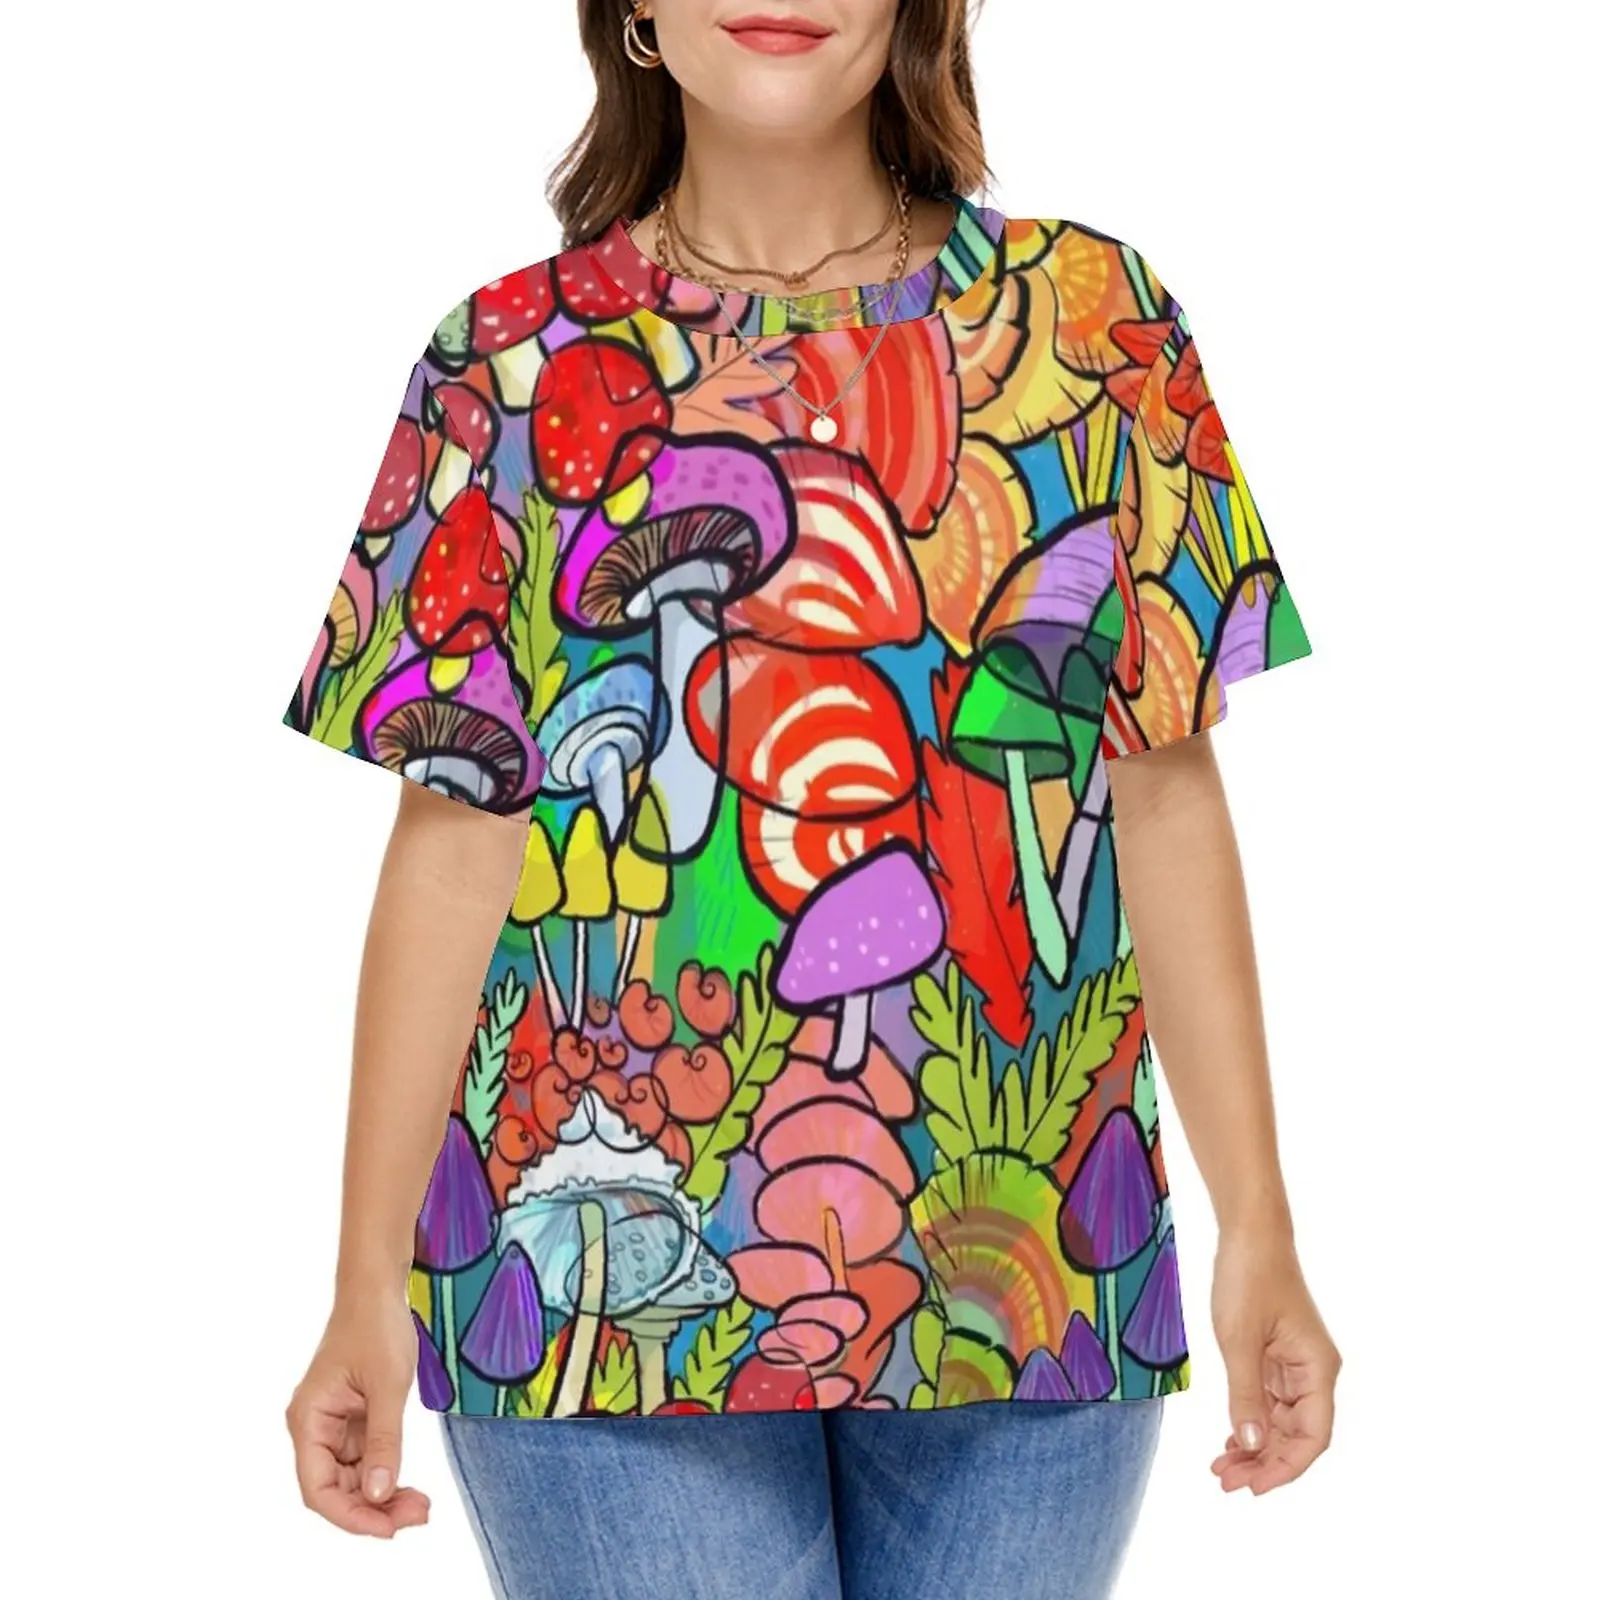 

Colorful Mushroom T-Shirt Overnight A Forest Cool T Shirts Short Sleeve Graphic Tops Female Street Wear Tees Plus Size